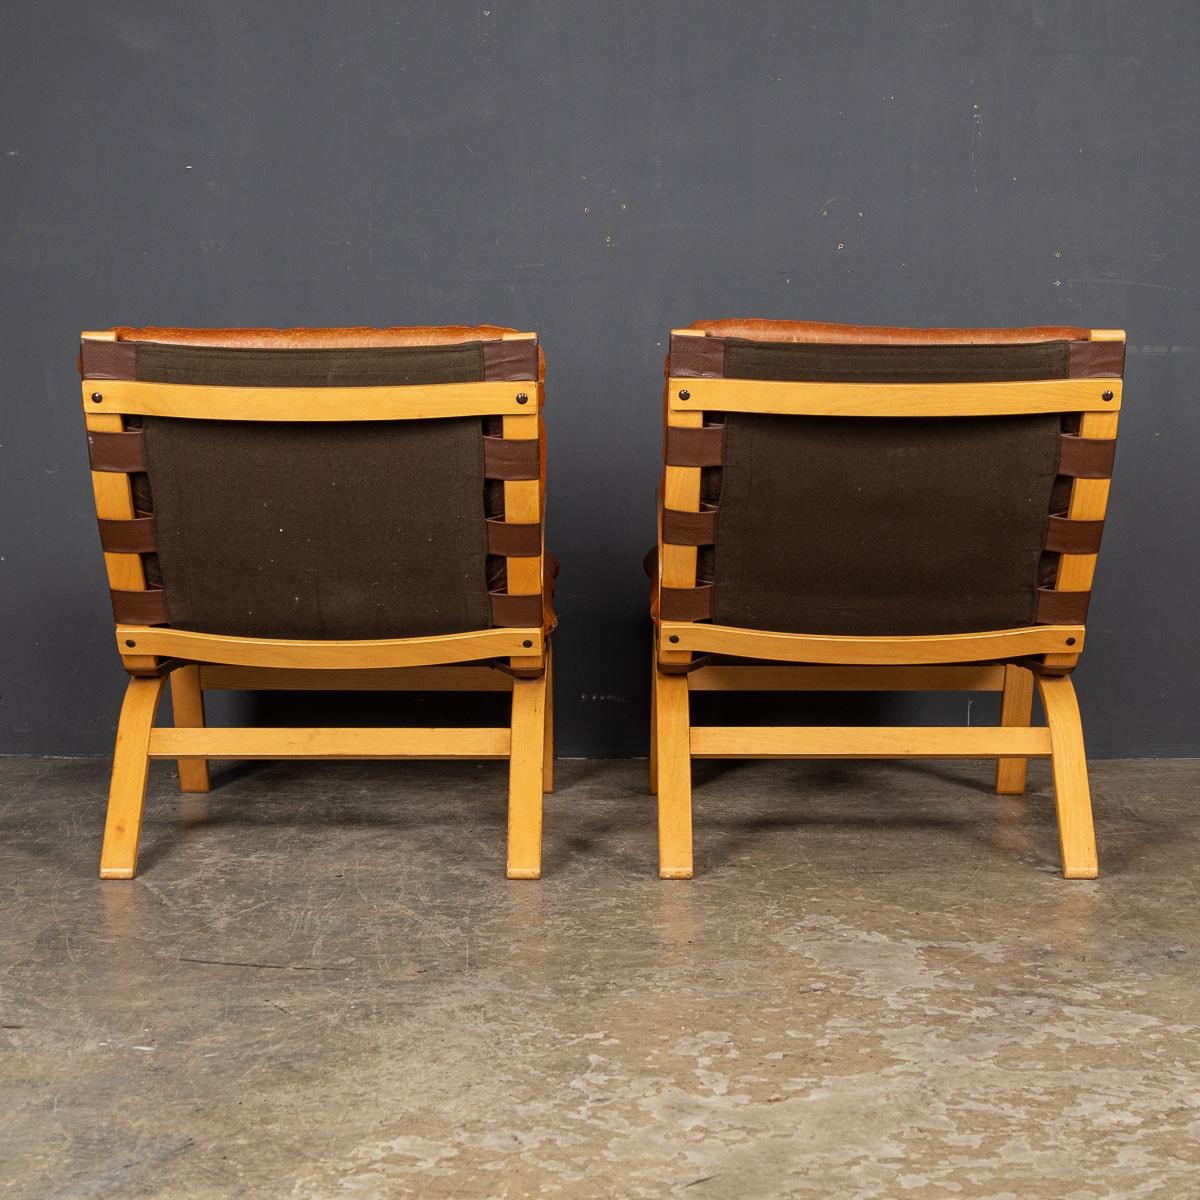 20th Century Danish Curved Beech Tan Leather Chairs By Farstrup Møbler, c.1970 3